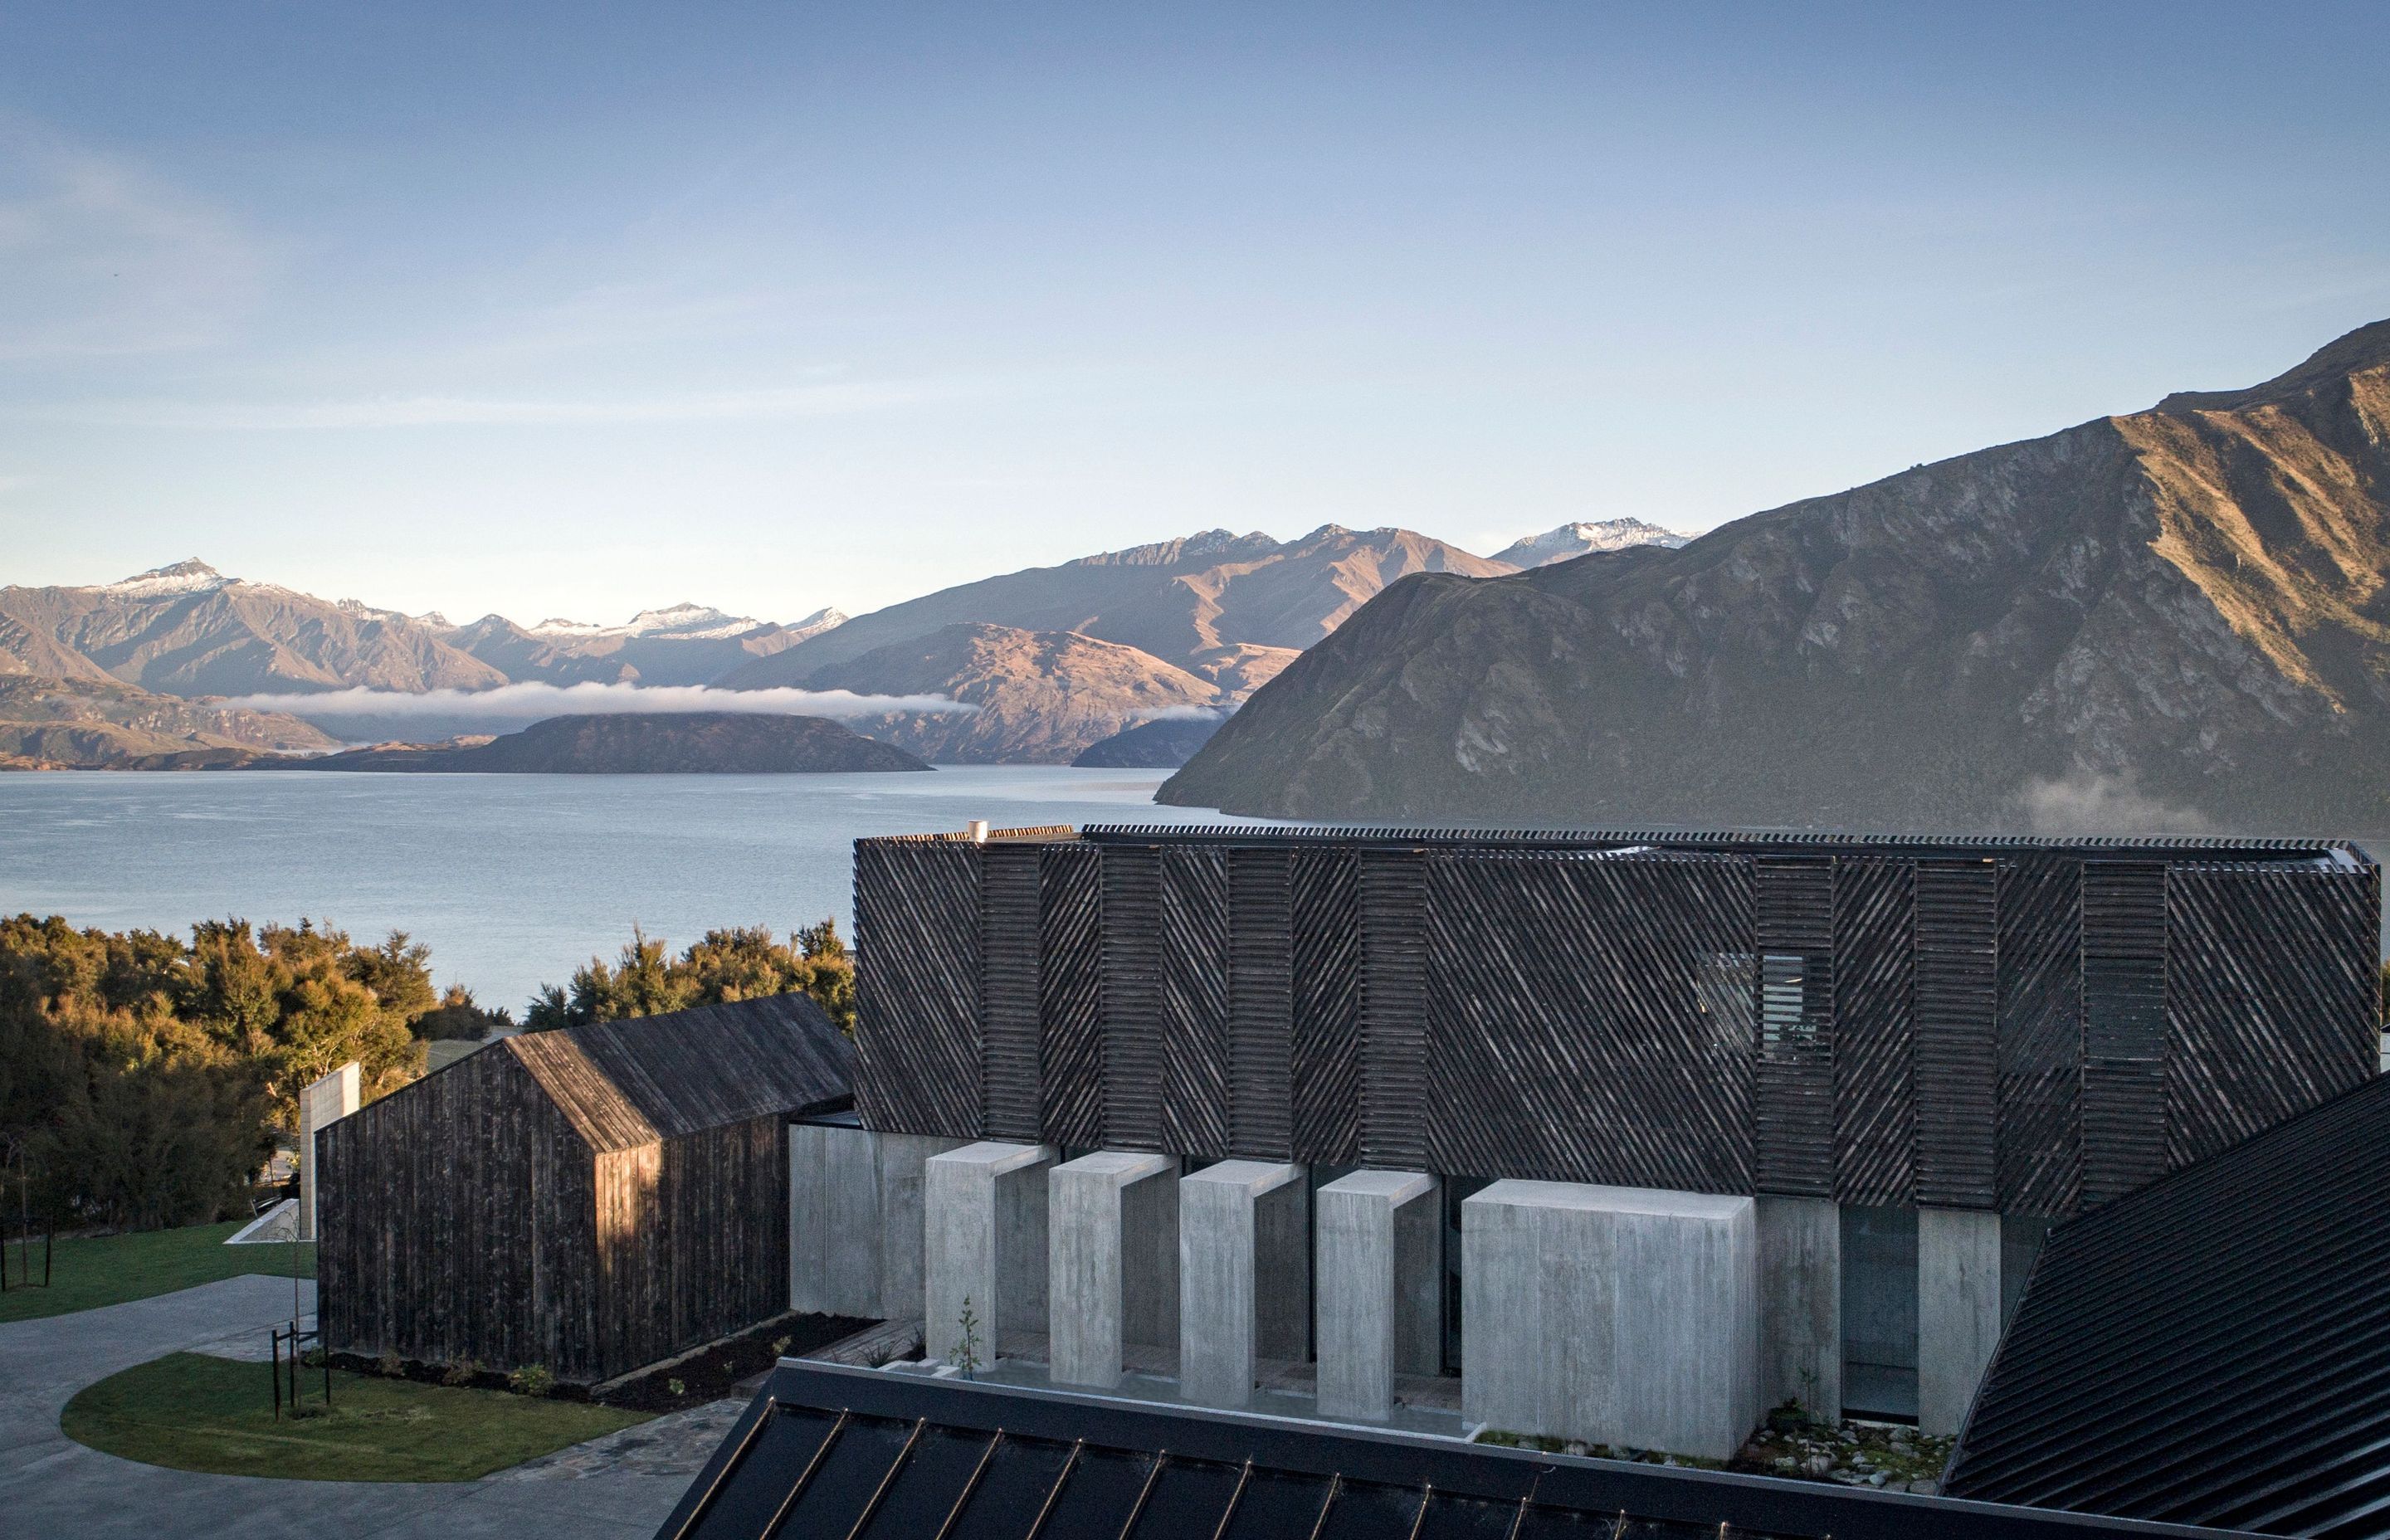 With stunning views of Lake Wanaka, this unusual home has distinctive charred timber cladding that blends beautifully into the surrounding hills and mountains.